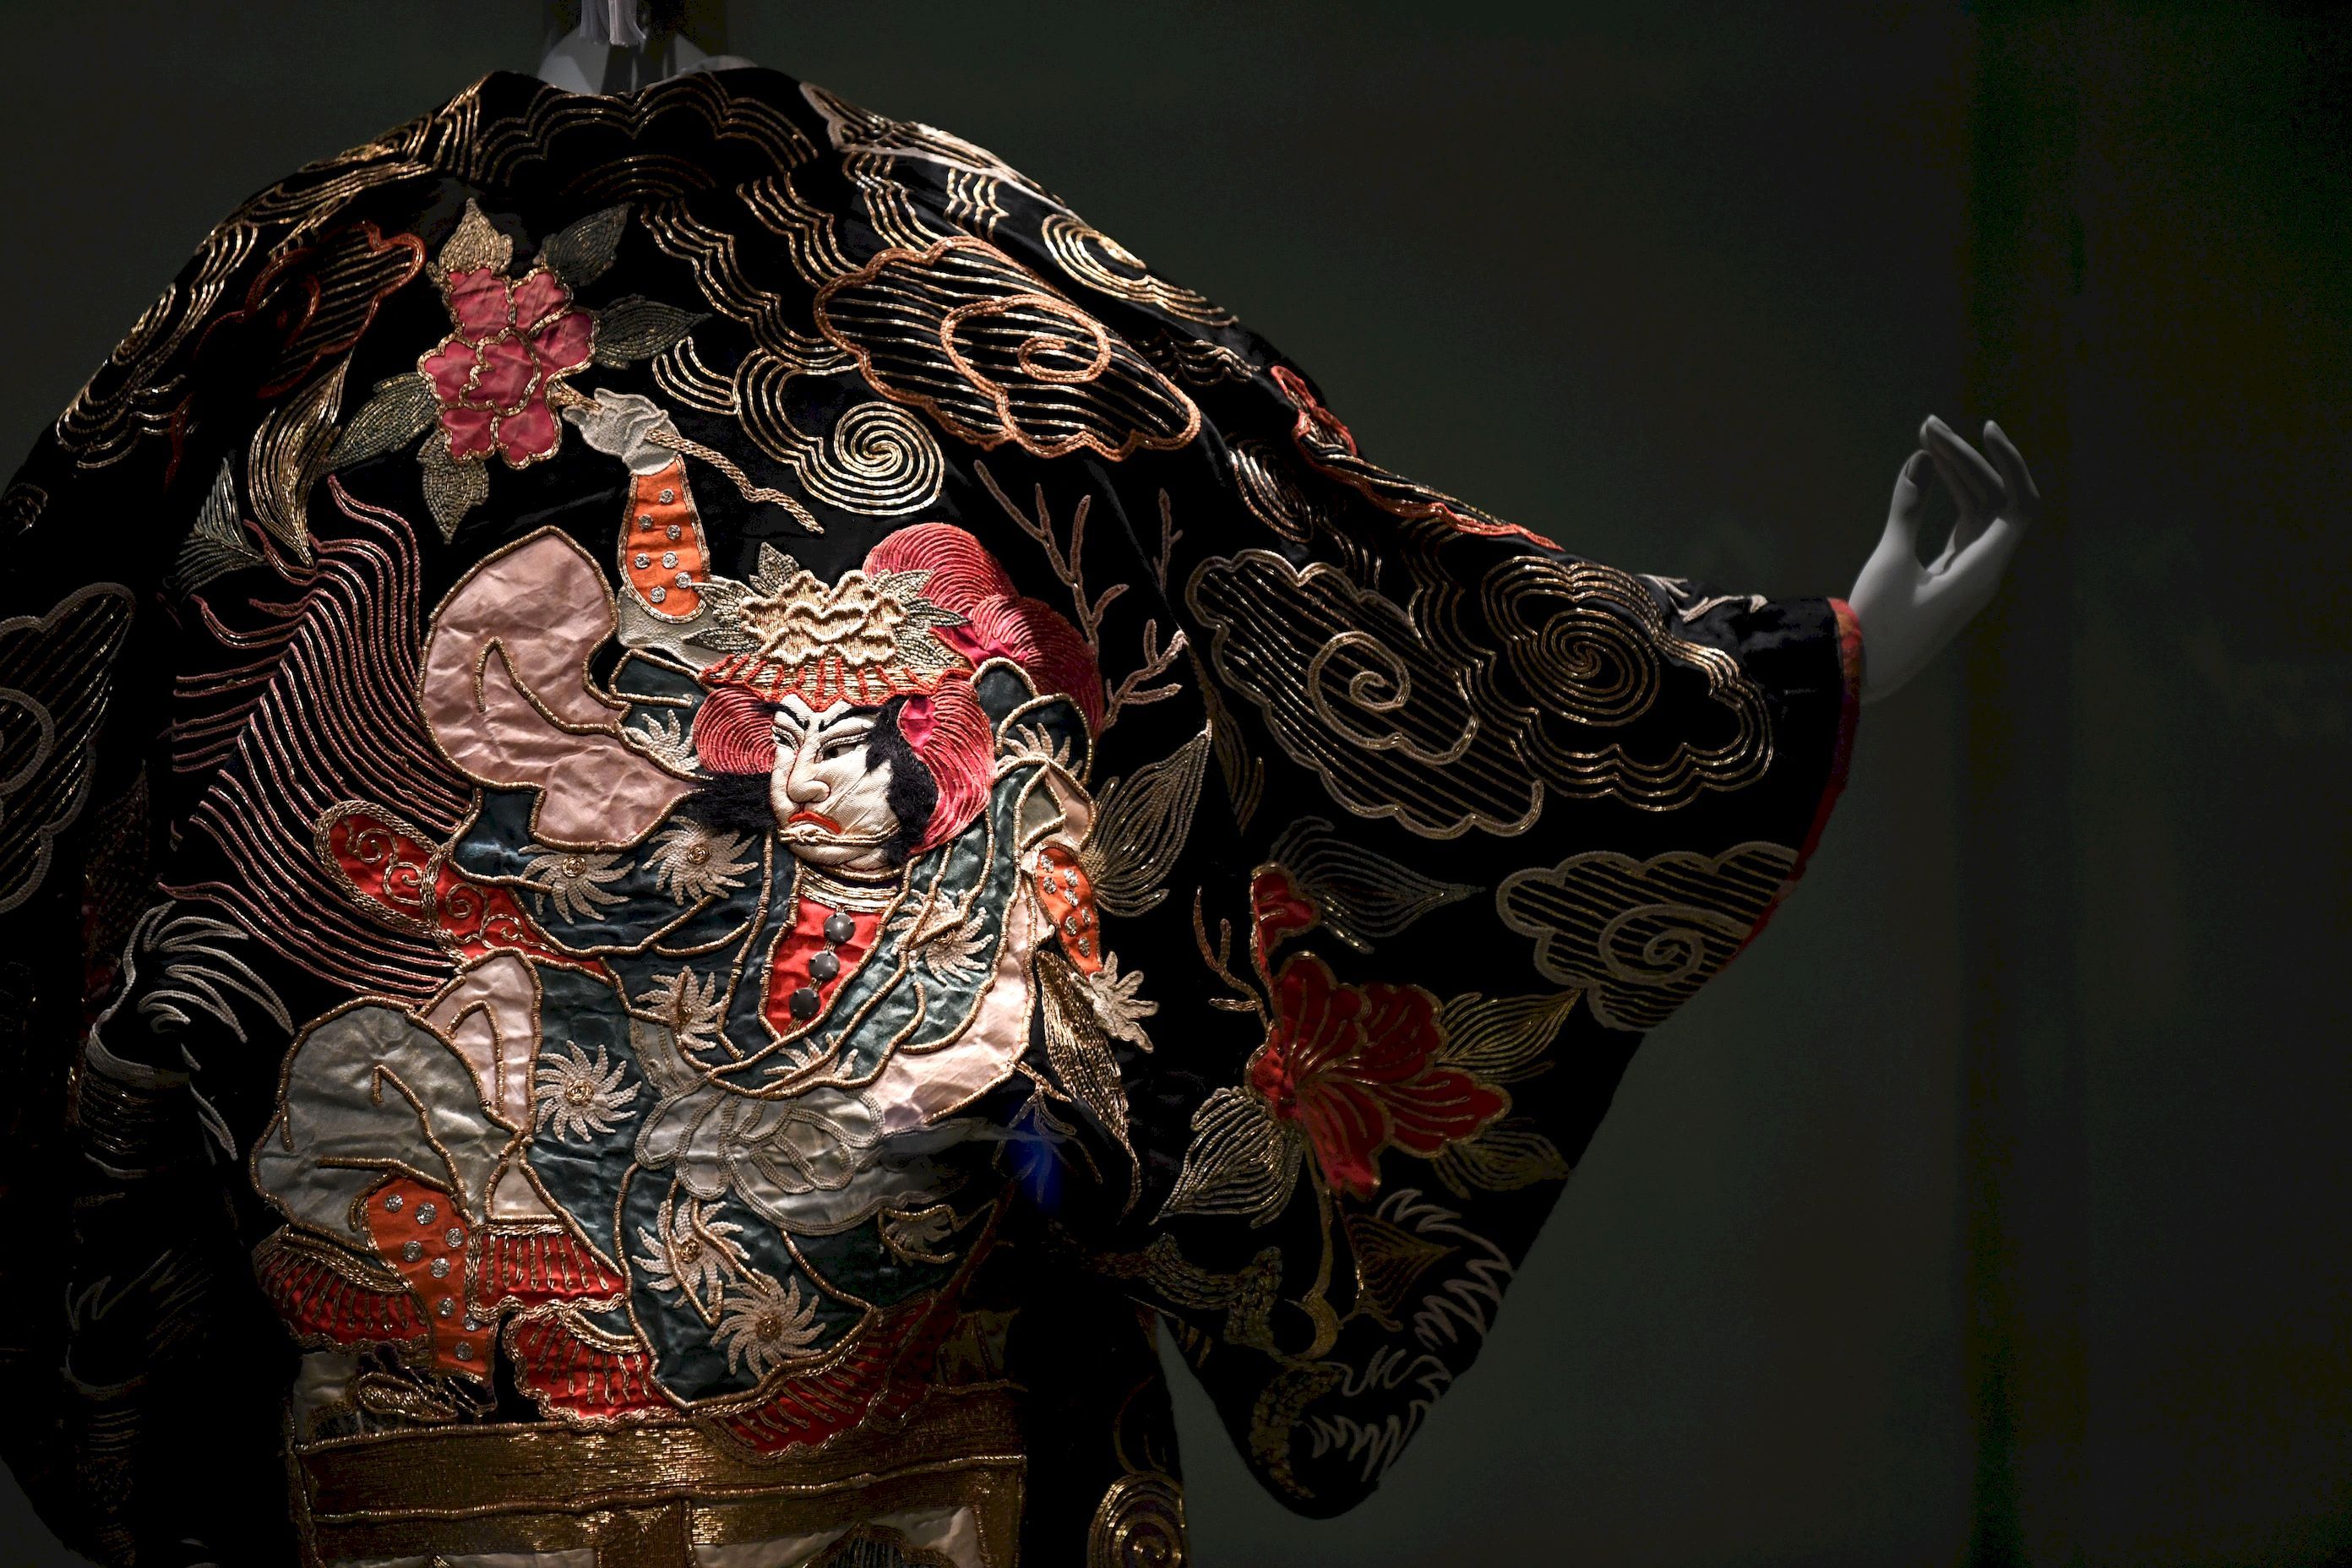 Worn by Freddie Mercury and Madonna, the kimono takes centre stage in a new London exhibition